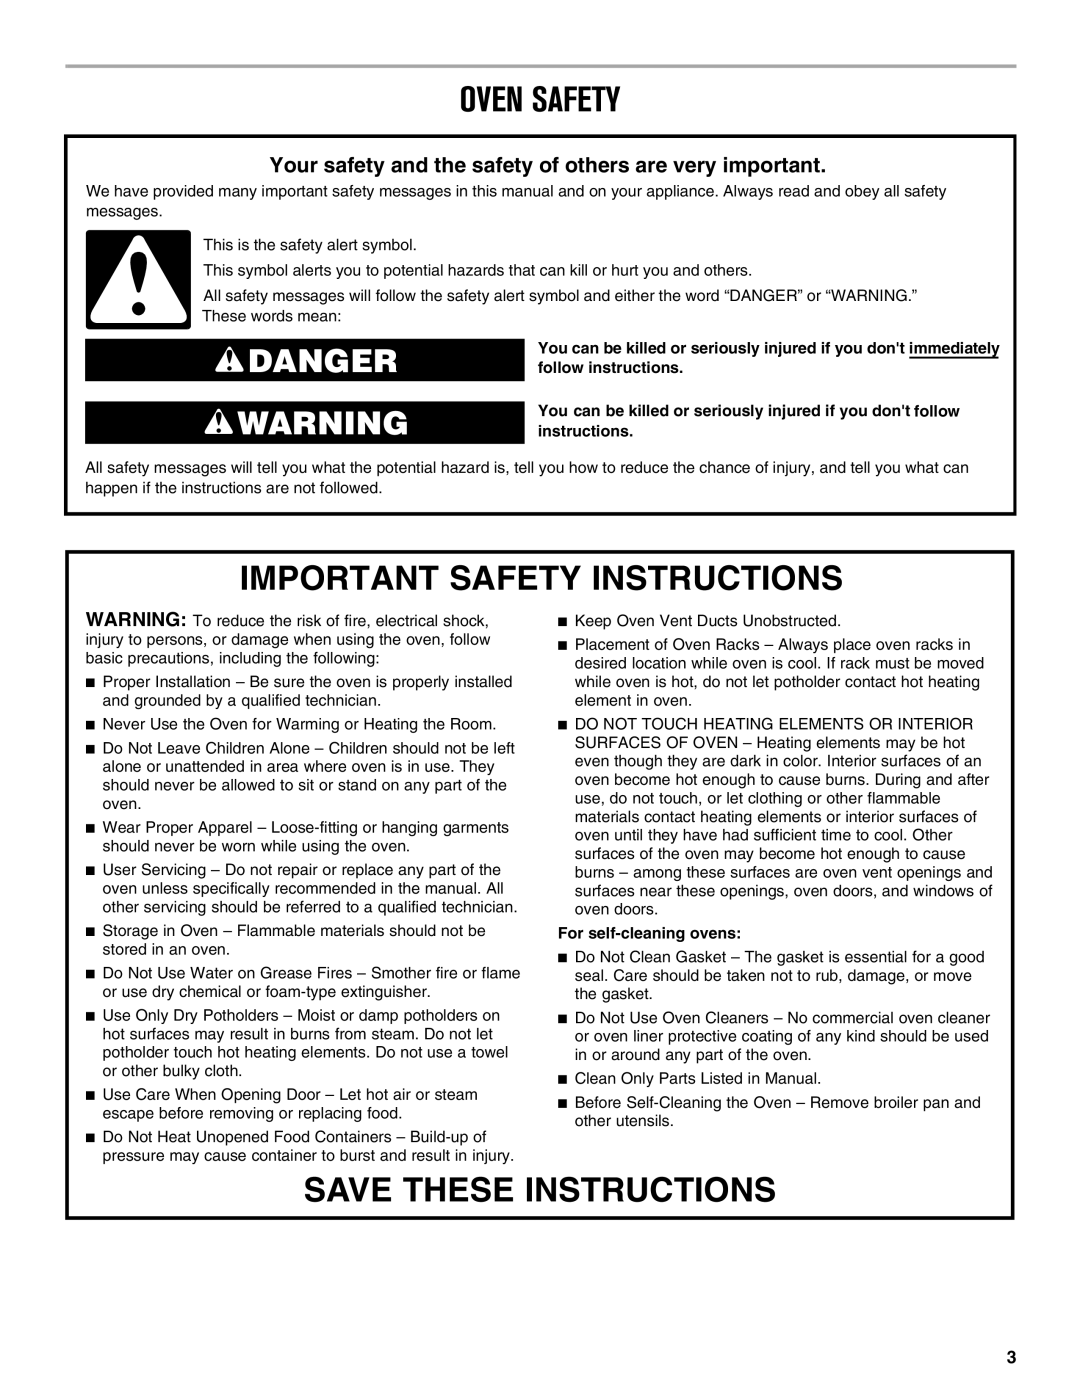 Maytag W10669242B manual Oven Safety, Important Safety Instructions, Save These Instructions, Danger 